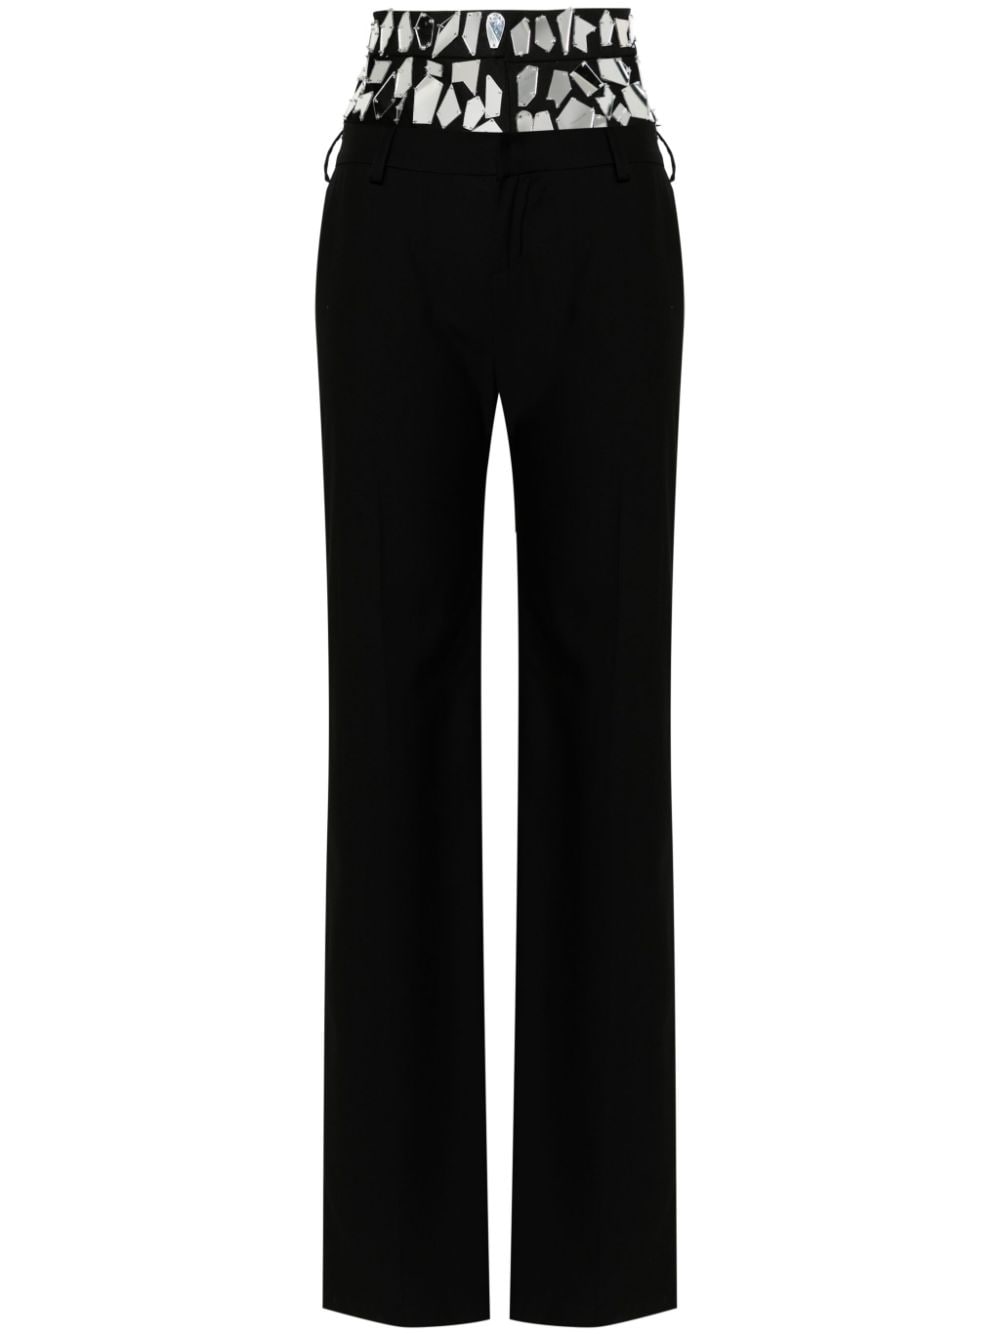 double-waist tailored trousers